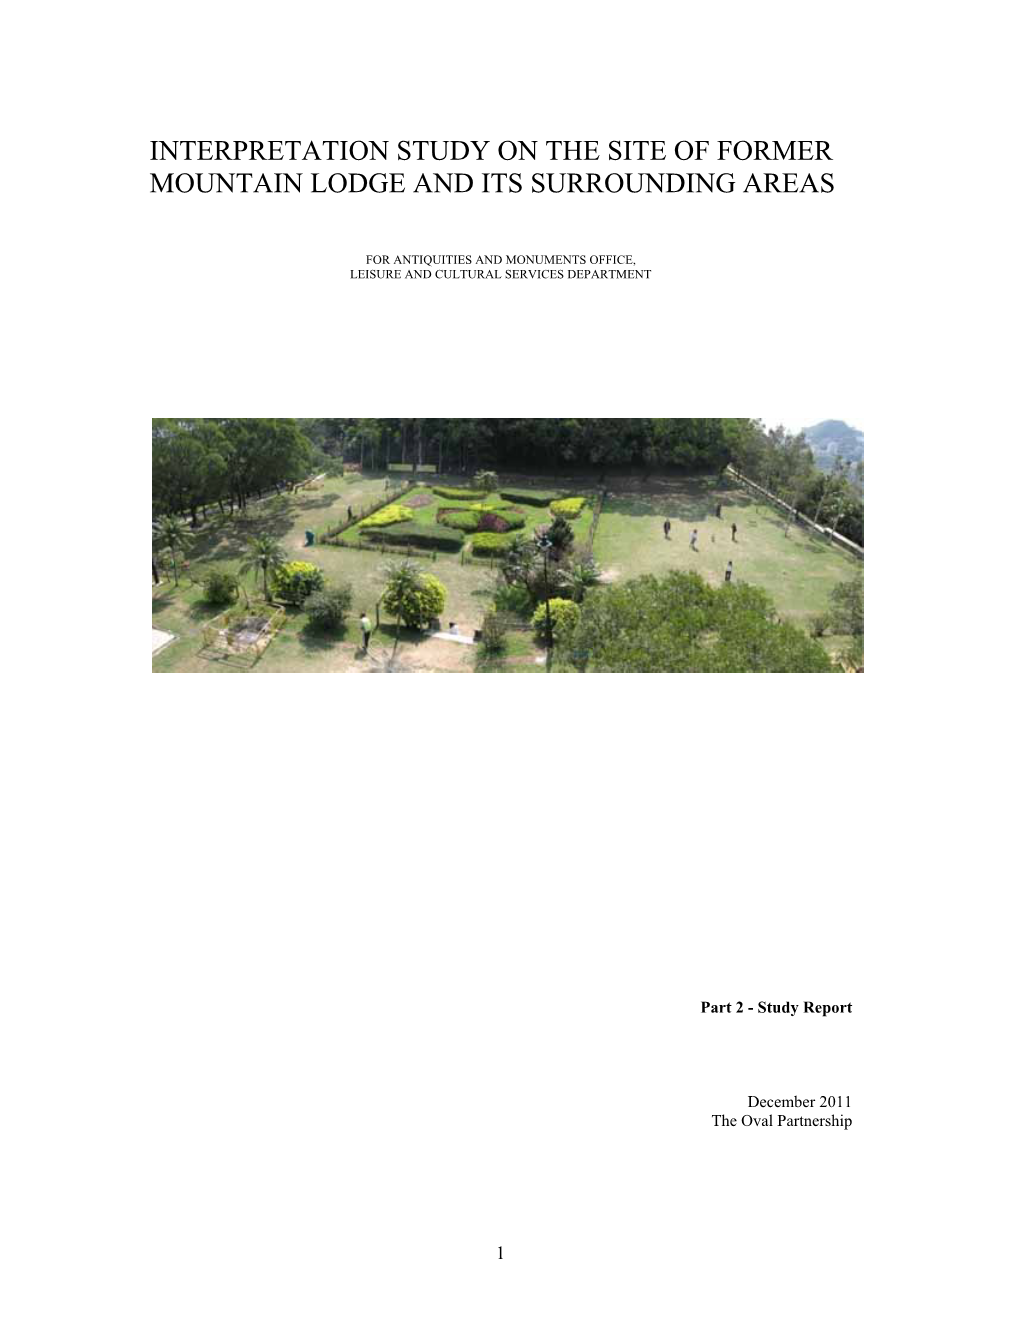 Interpretation Study on the Site of Former Mountain Lodge and Its Surrounding Areas